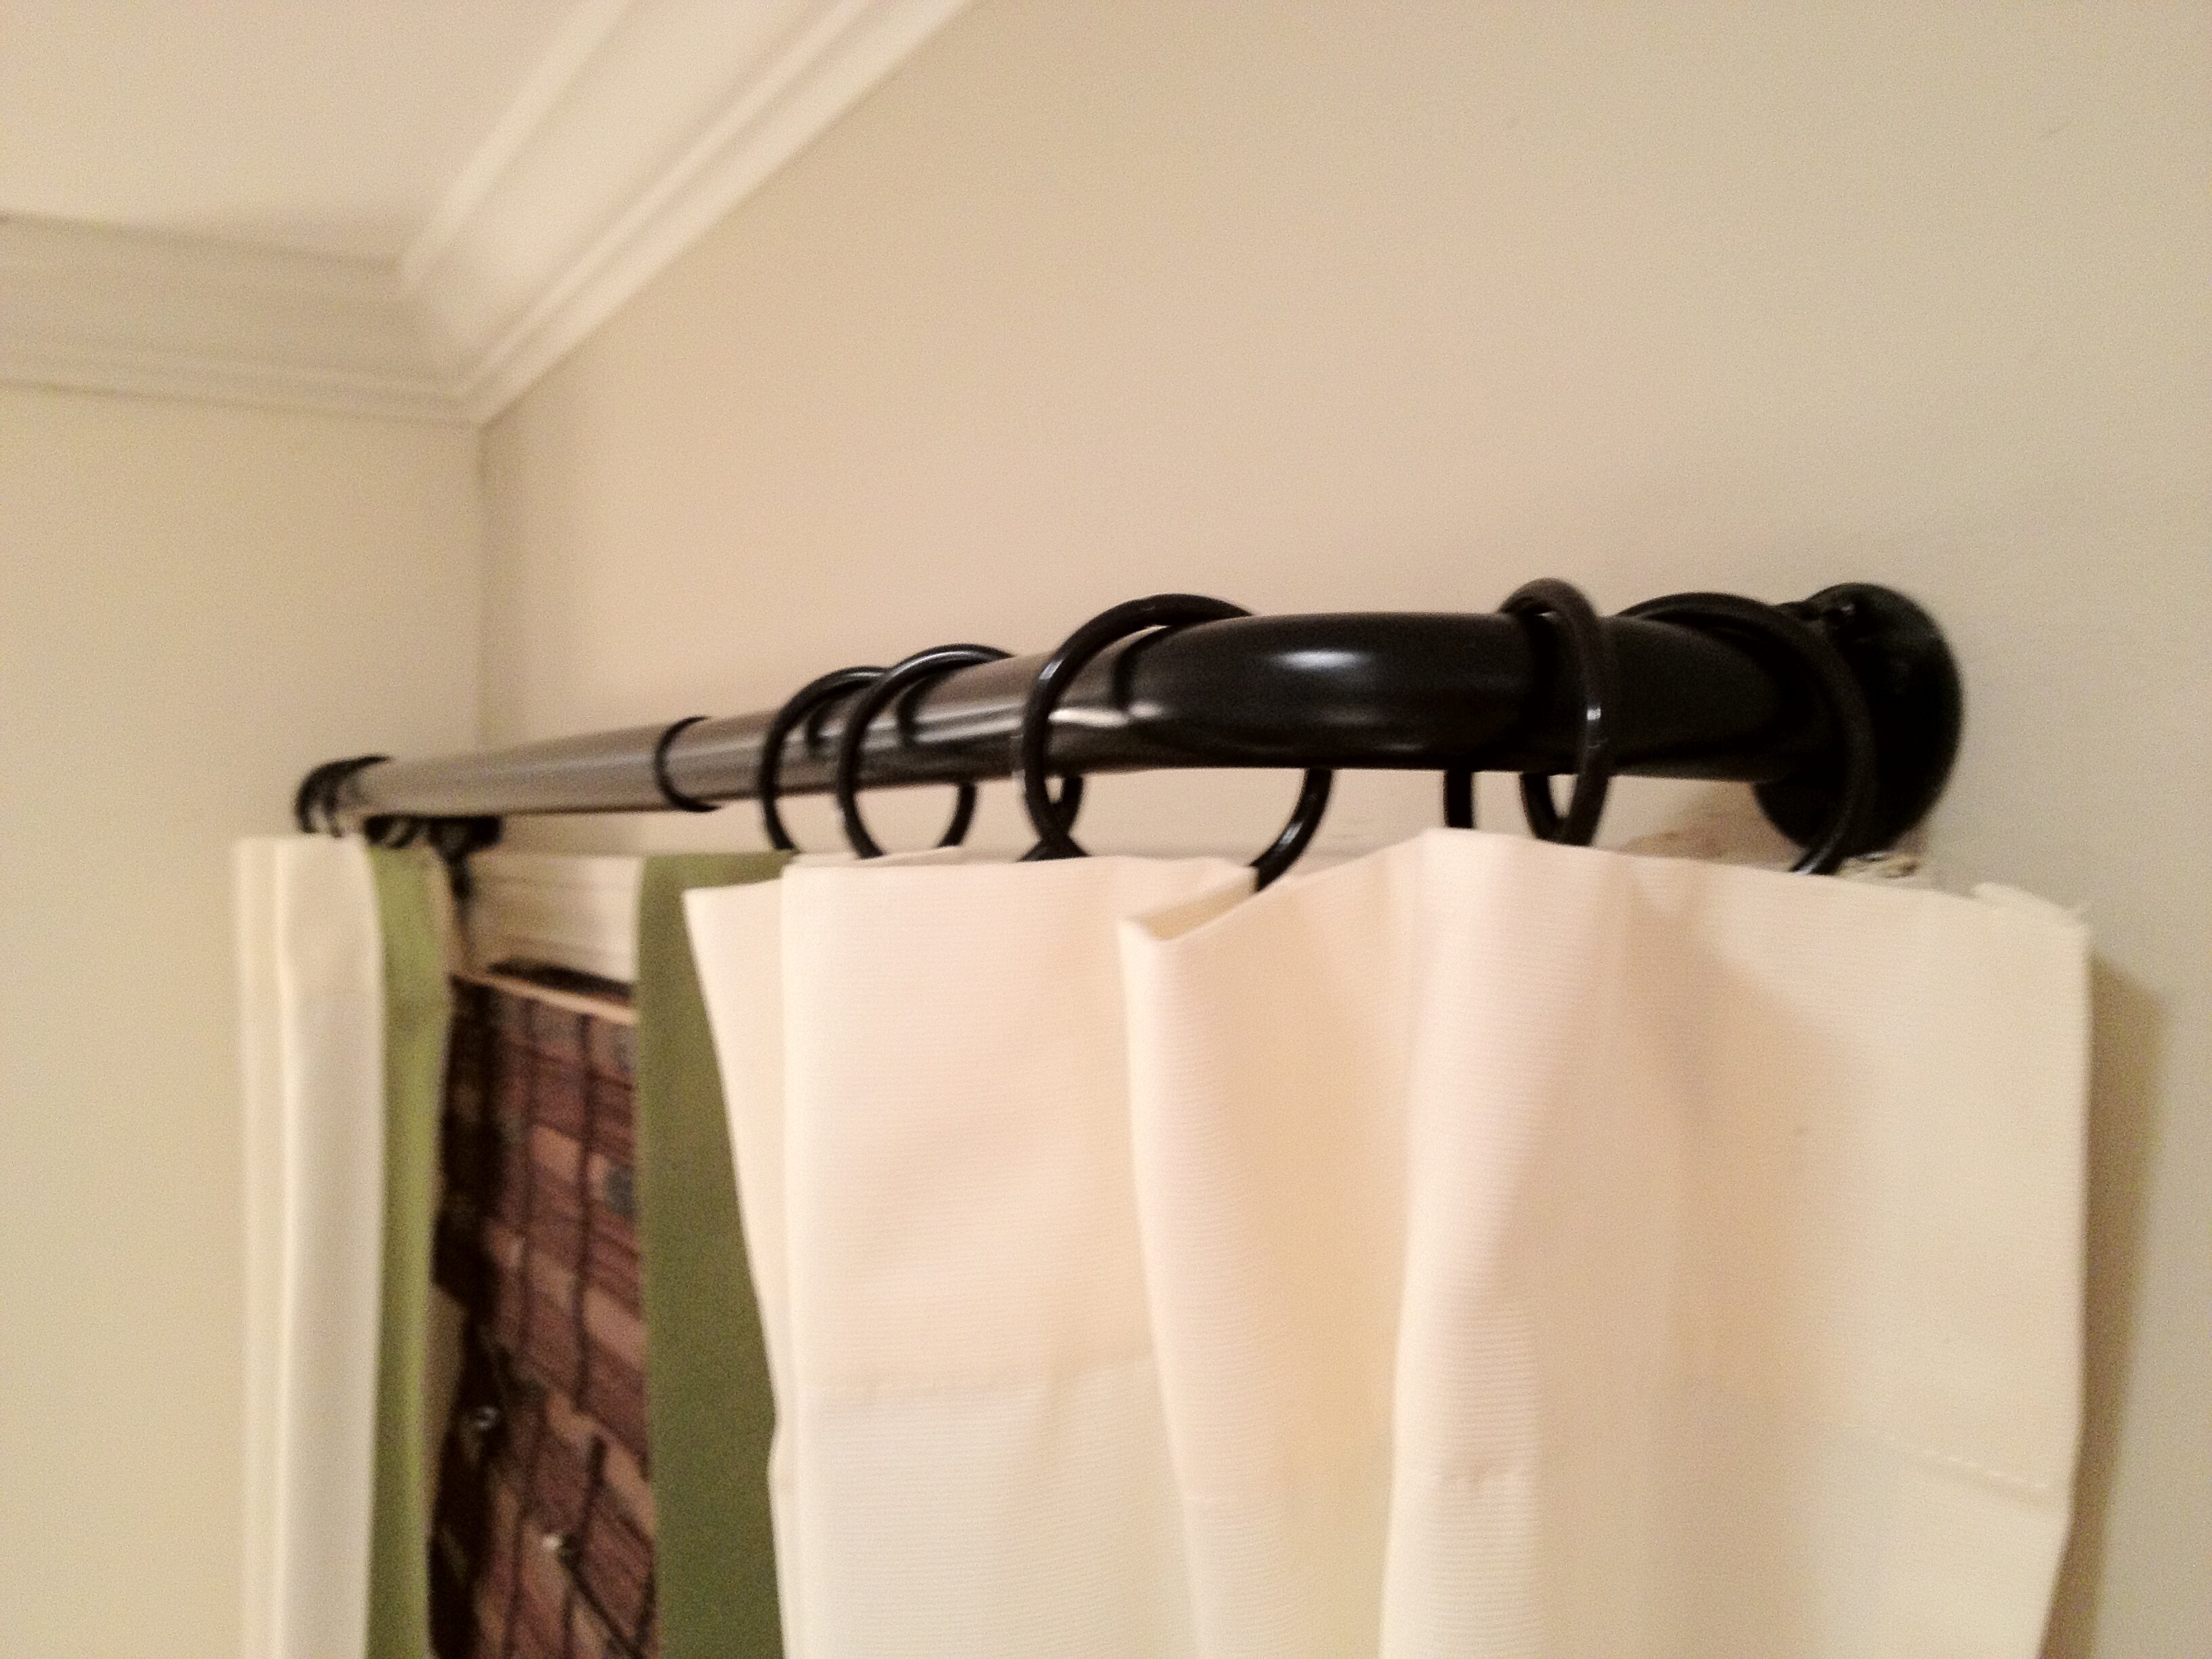 Bowed Shower Curtain Rod | Fixed Shower Rods | Shower Curtain Tension Rod